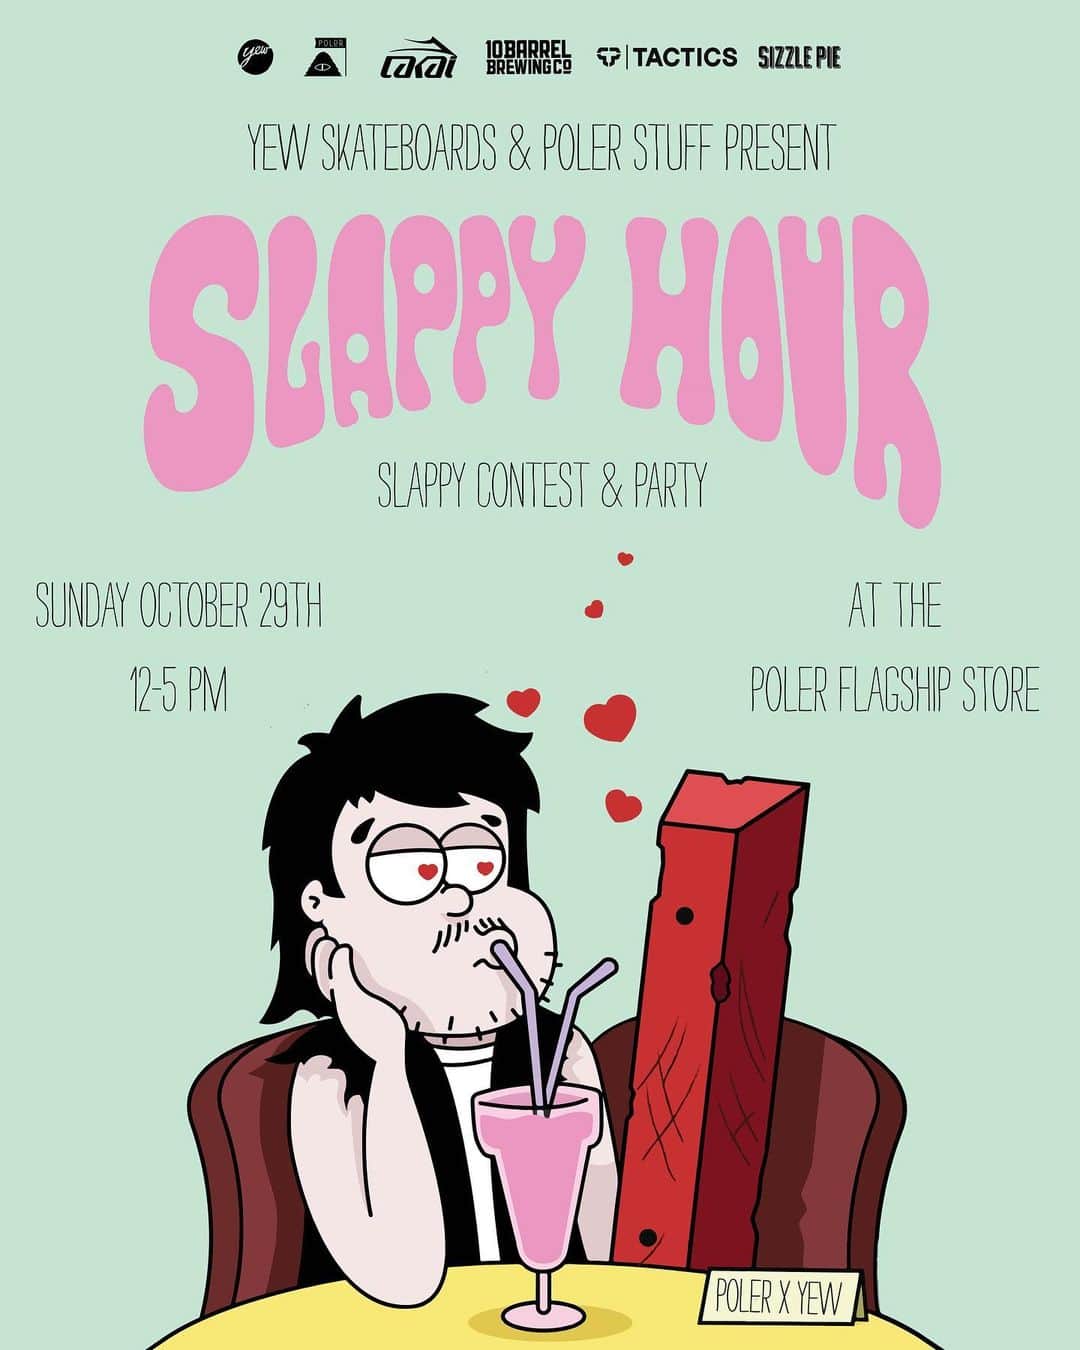 Poler Outdoor Stuffのインスタグラム：「OCTOBER 29TH! Yew Skateboards & Poler Stuff present Slappy Hour 💖 A slappy contest and collaboration board release party!   Bring your best slappy and costume (encouraged but not required) and join us at @polerportland for free drinks and pizza! 🍺🍕  Sunday October 29th 12-5pm  Artwork by Chad Richardson @noheacreativeco 💋  Thank yew to @polerportland  @polerstuff  @tactics  @lakailtd @10barrelbrewing  @sizzlepie  @noheacreativeco  See you there! #yewskateboards #lcatforever」